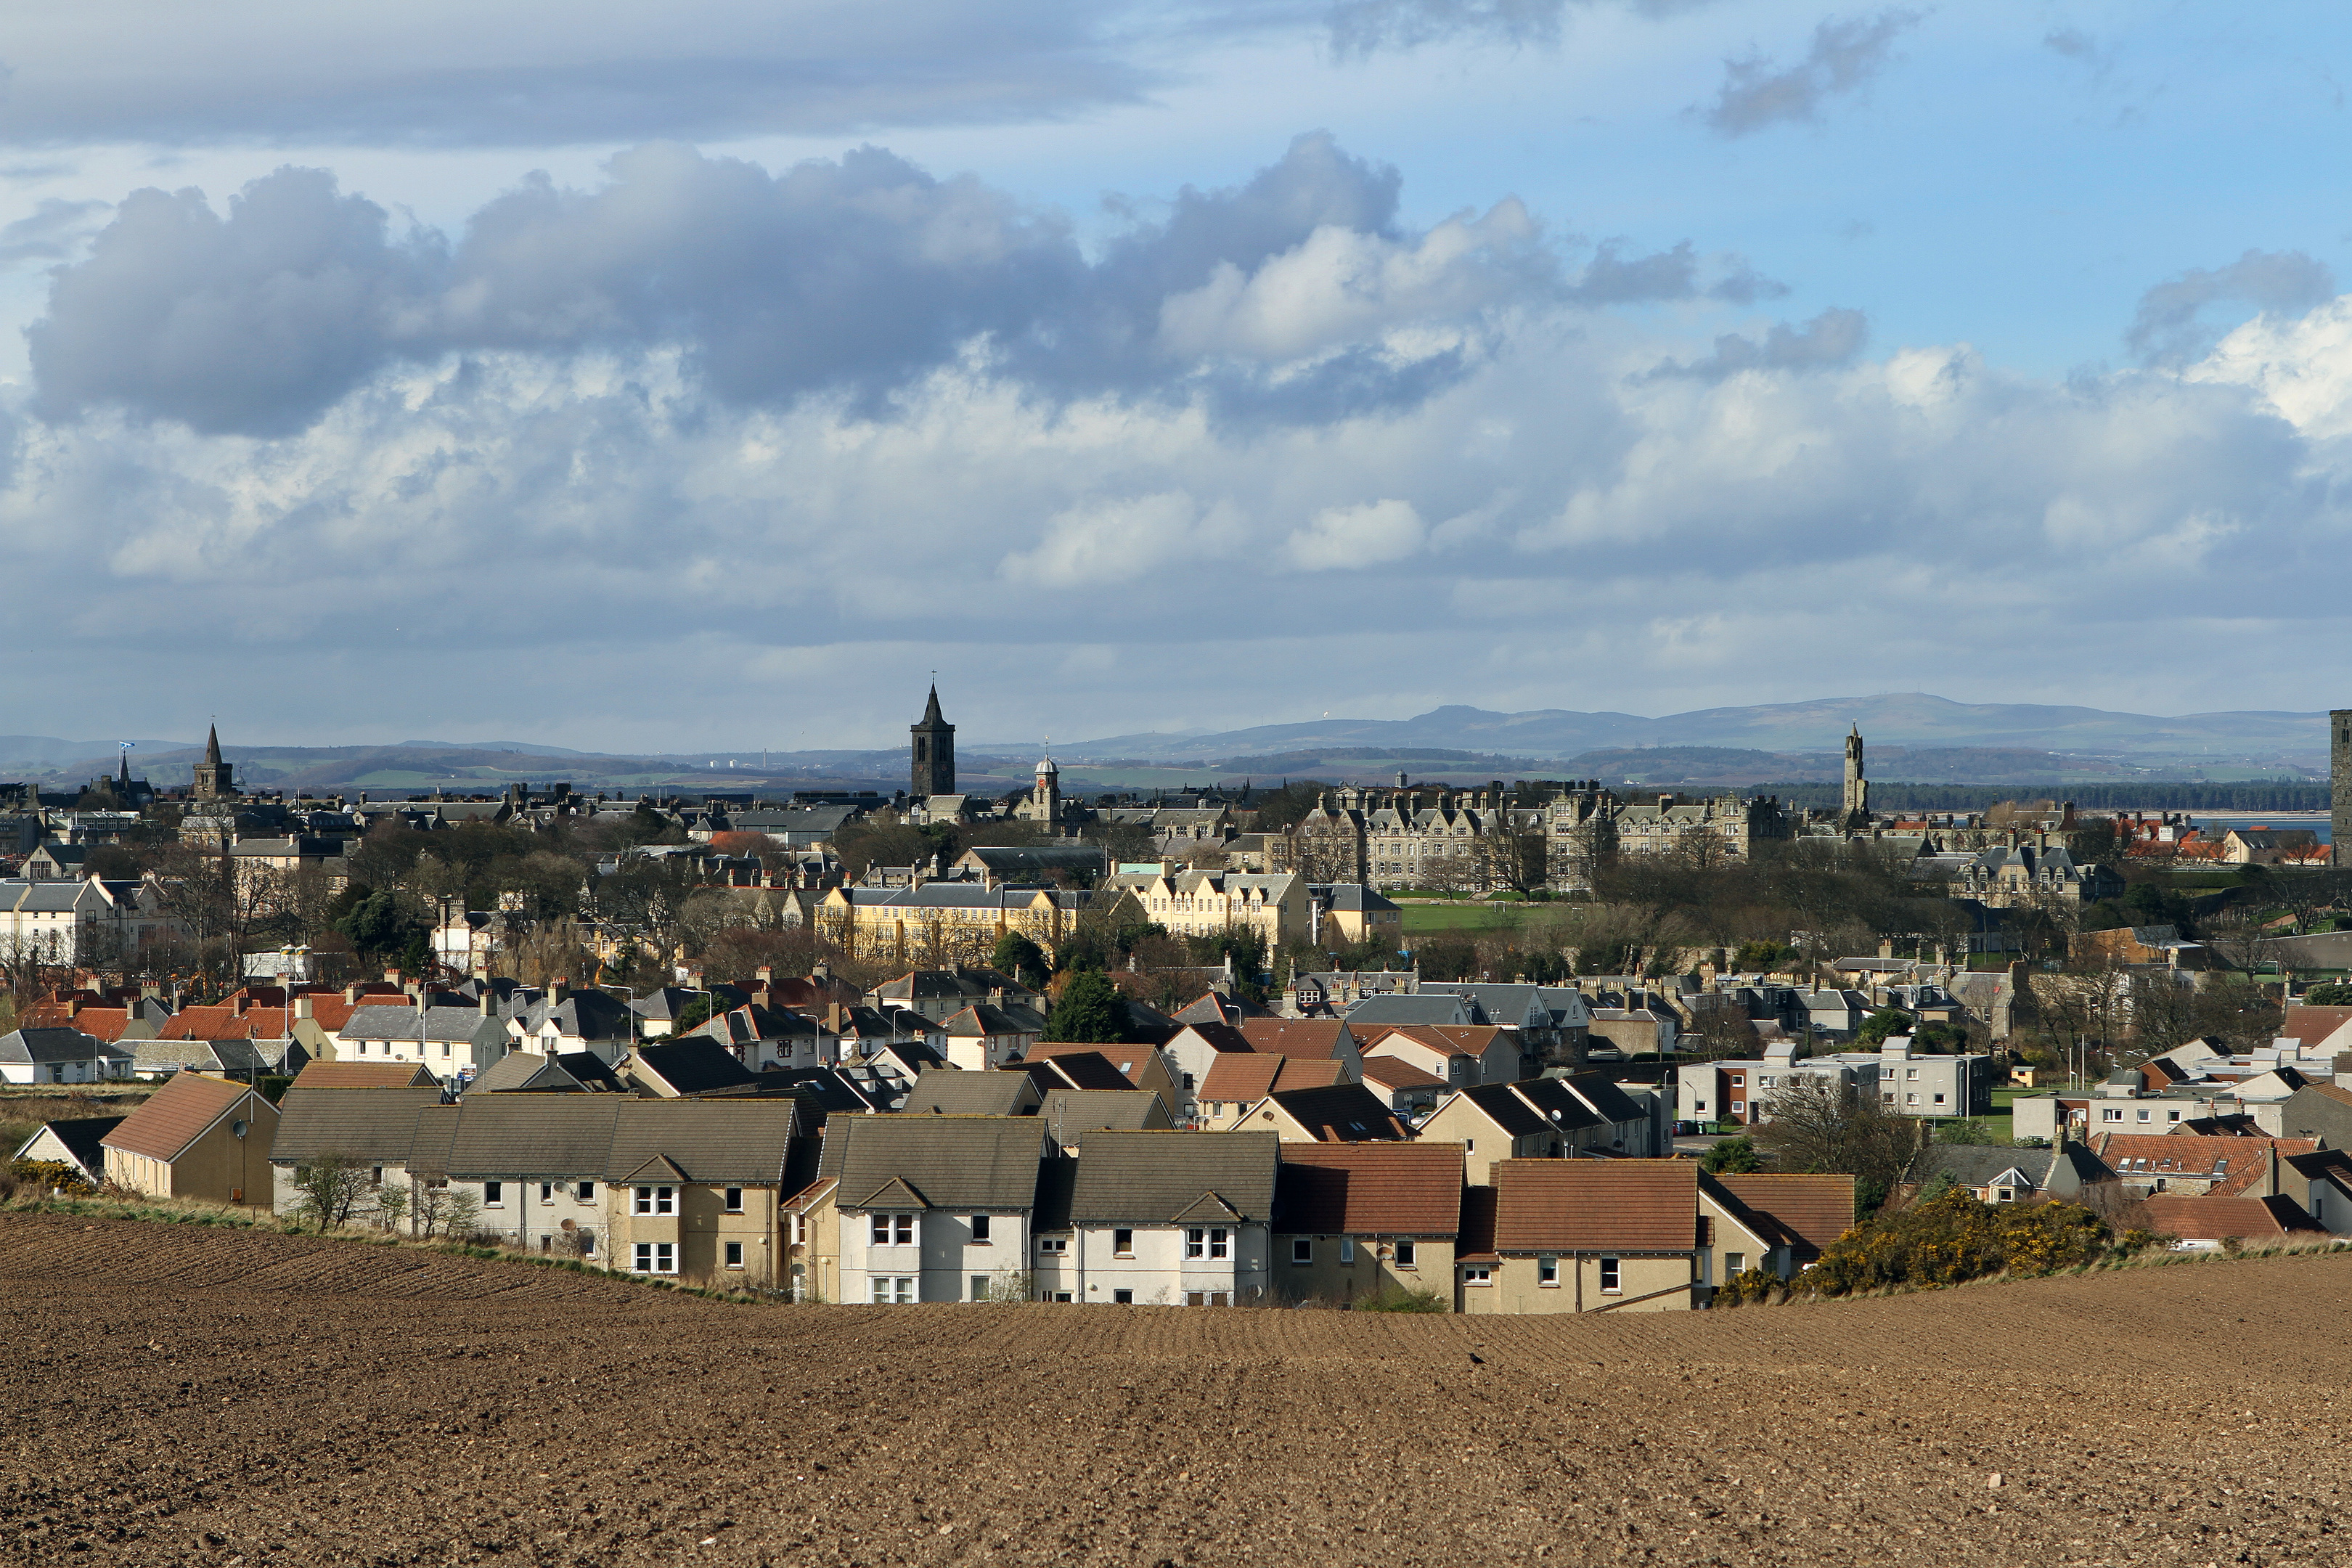 St Andrews featured on the list - but visitors were surprised by its size